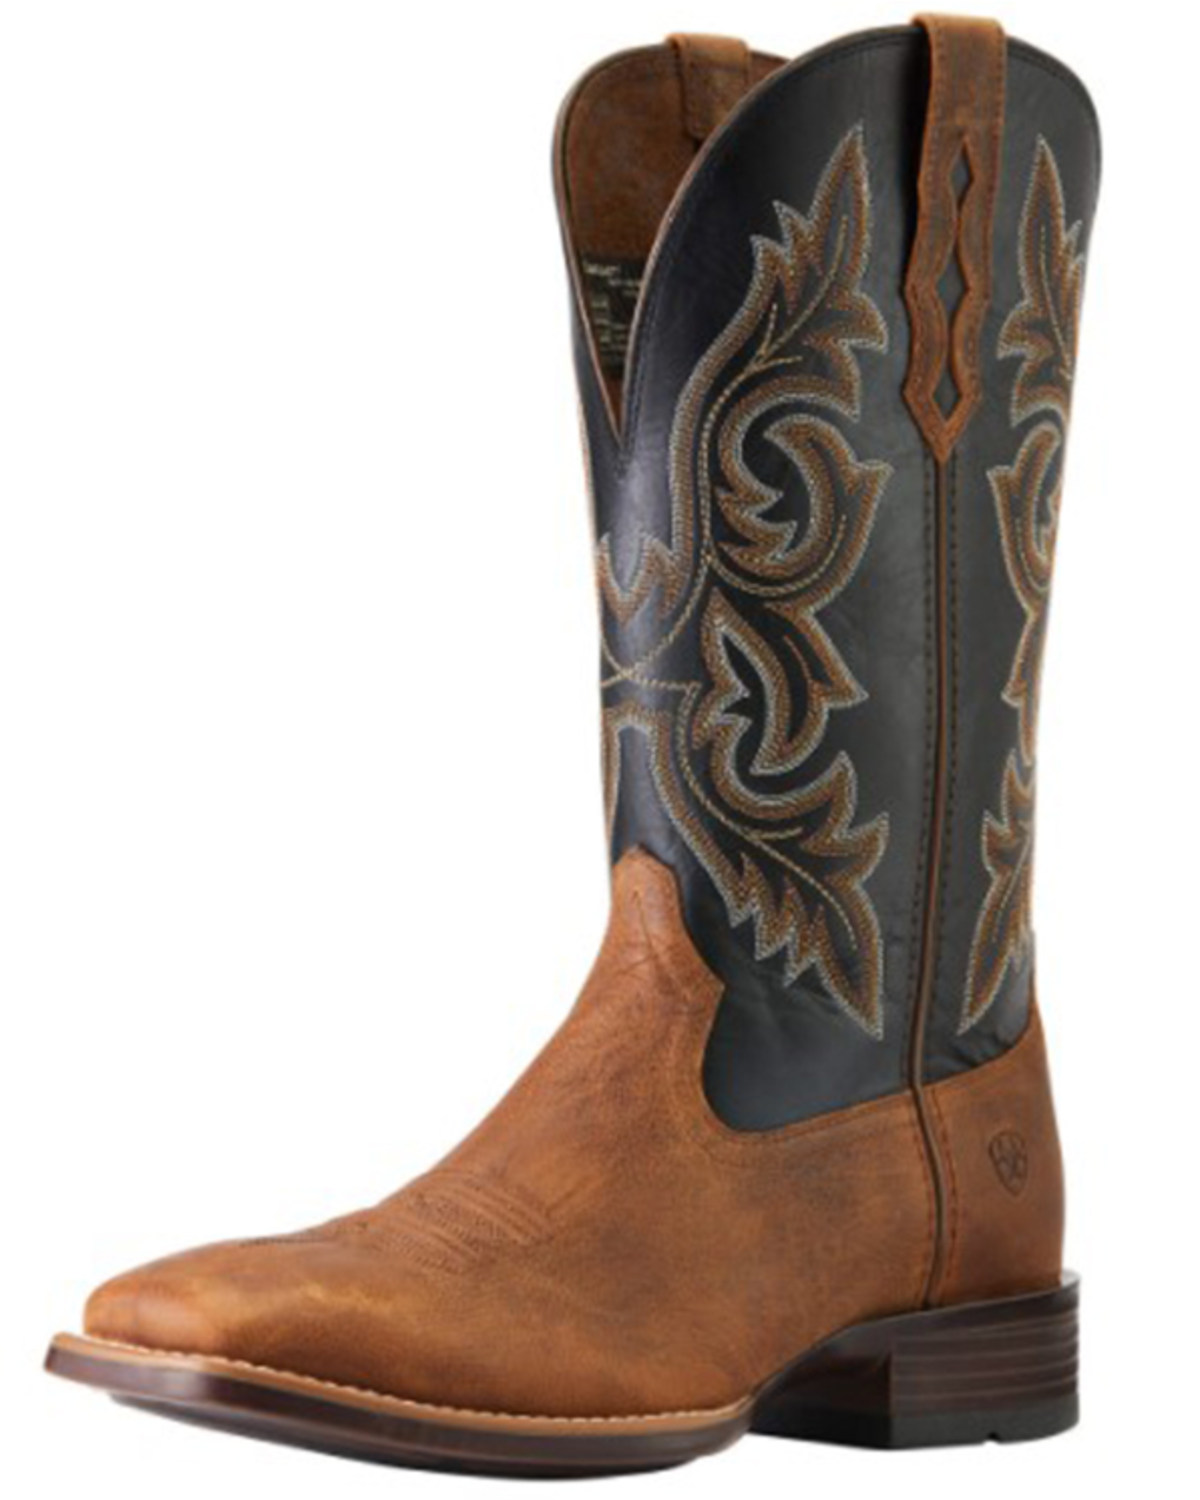 Ariat Men's Drover Ultra Performance Bantamweight Western Boots - Broad Square Toe